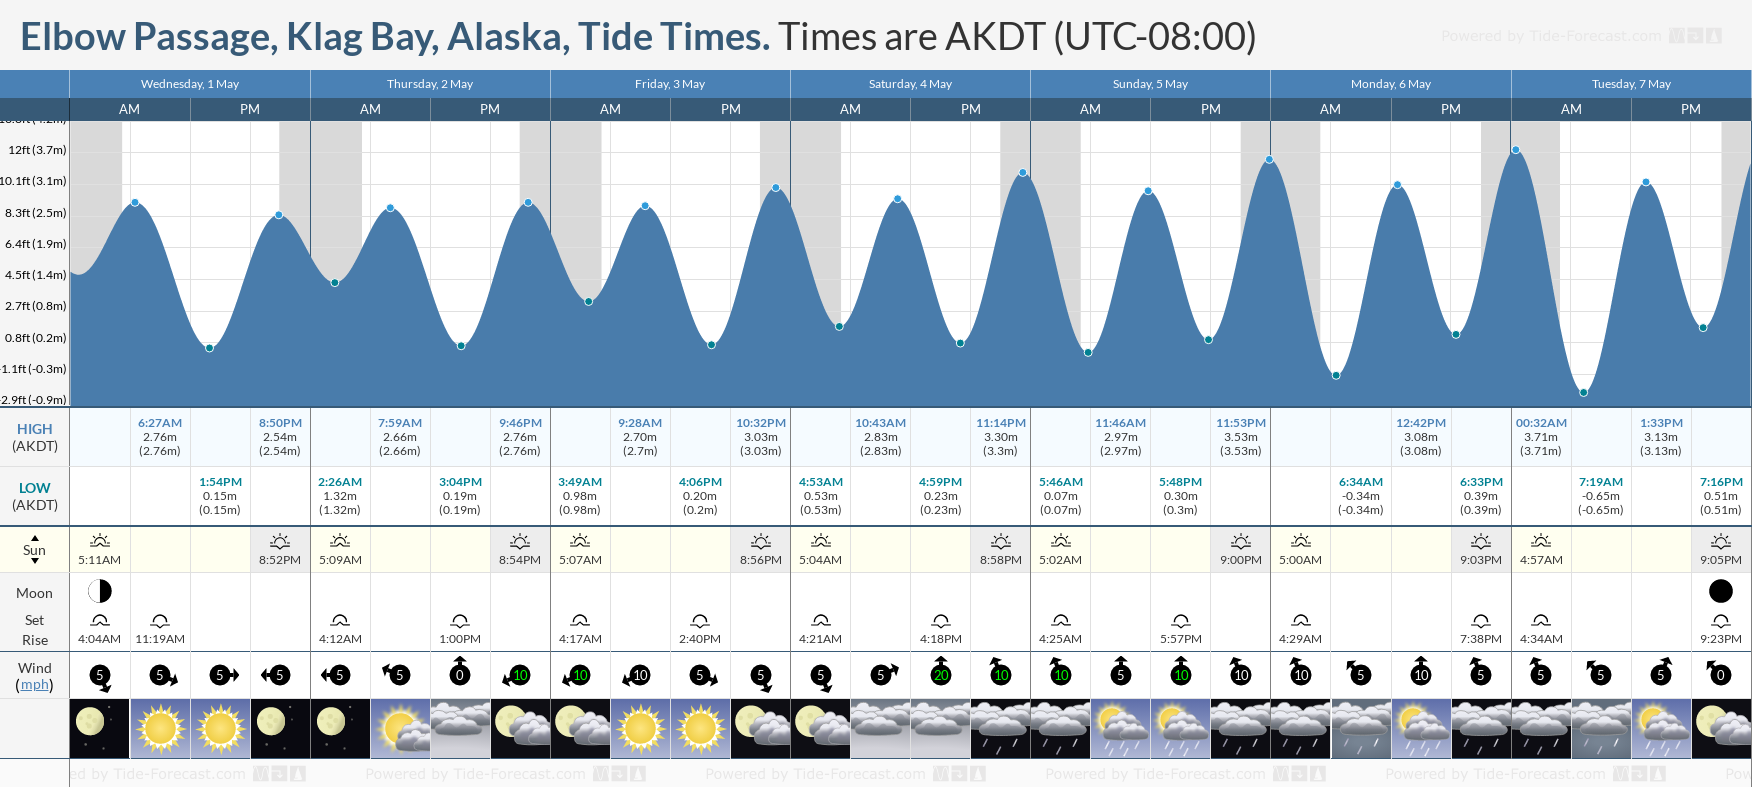 Elbow Passage, Klag Bay, Alaska Tide Chart including high and low tide tide times for the next 7 days